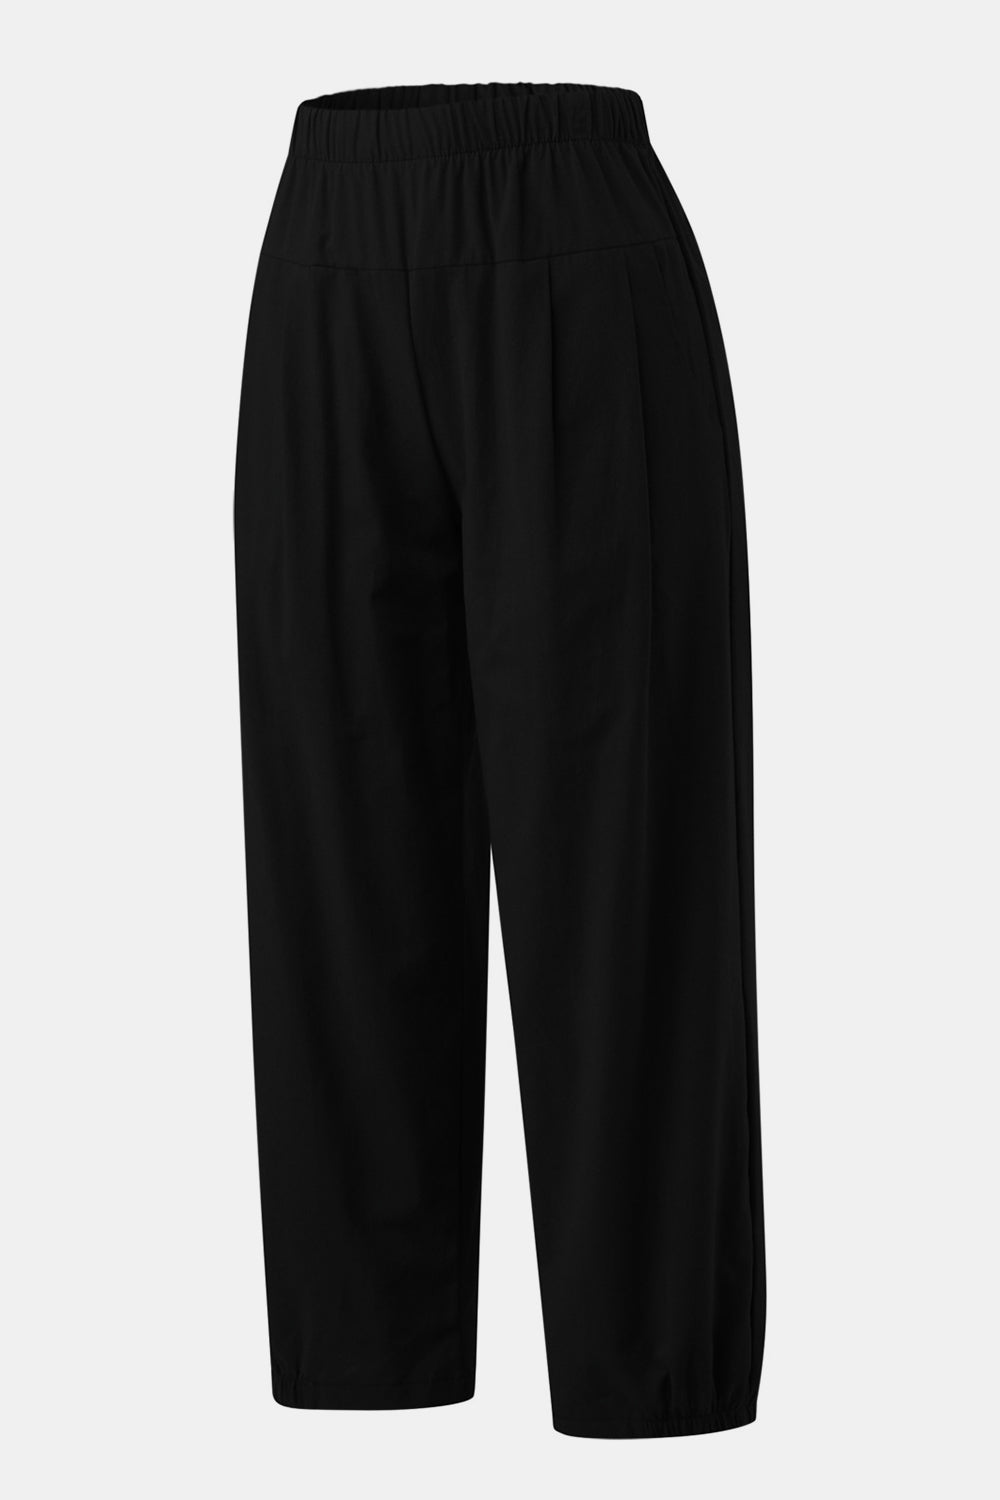 STUNNLY  Full Size Elastic Waist Cropped Pants   